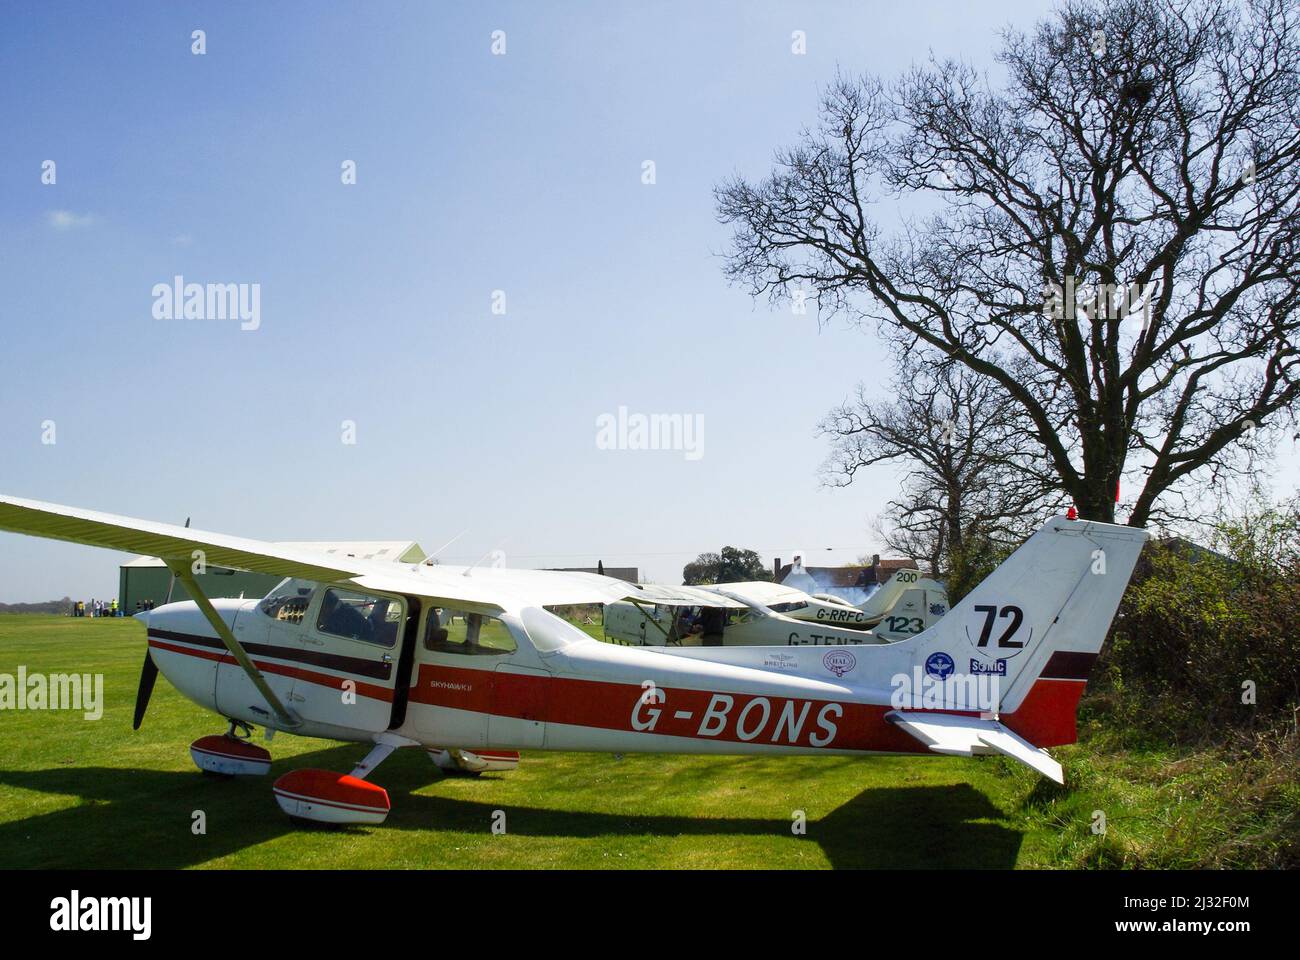 Cessna 172N Skyhawk 100 II plane G-BONS at a round of the Royal Aero Club Air Race at Great Oakley airfield in rural Essex, UK. Planes ready to fly Stock Photo